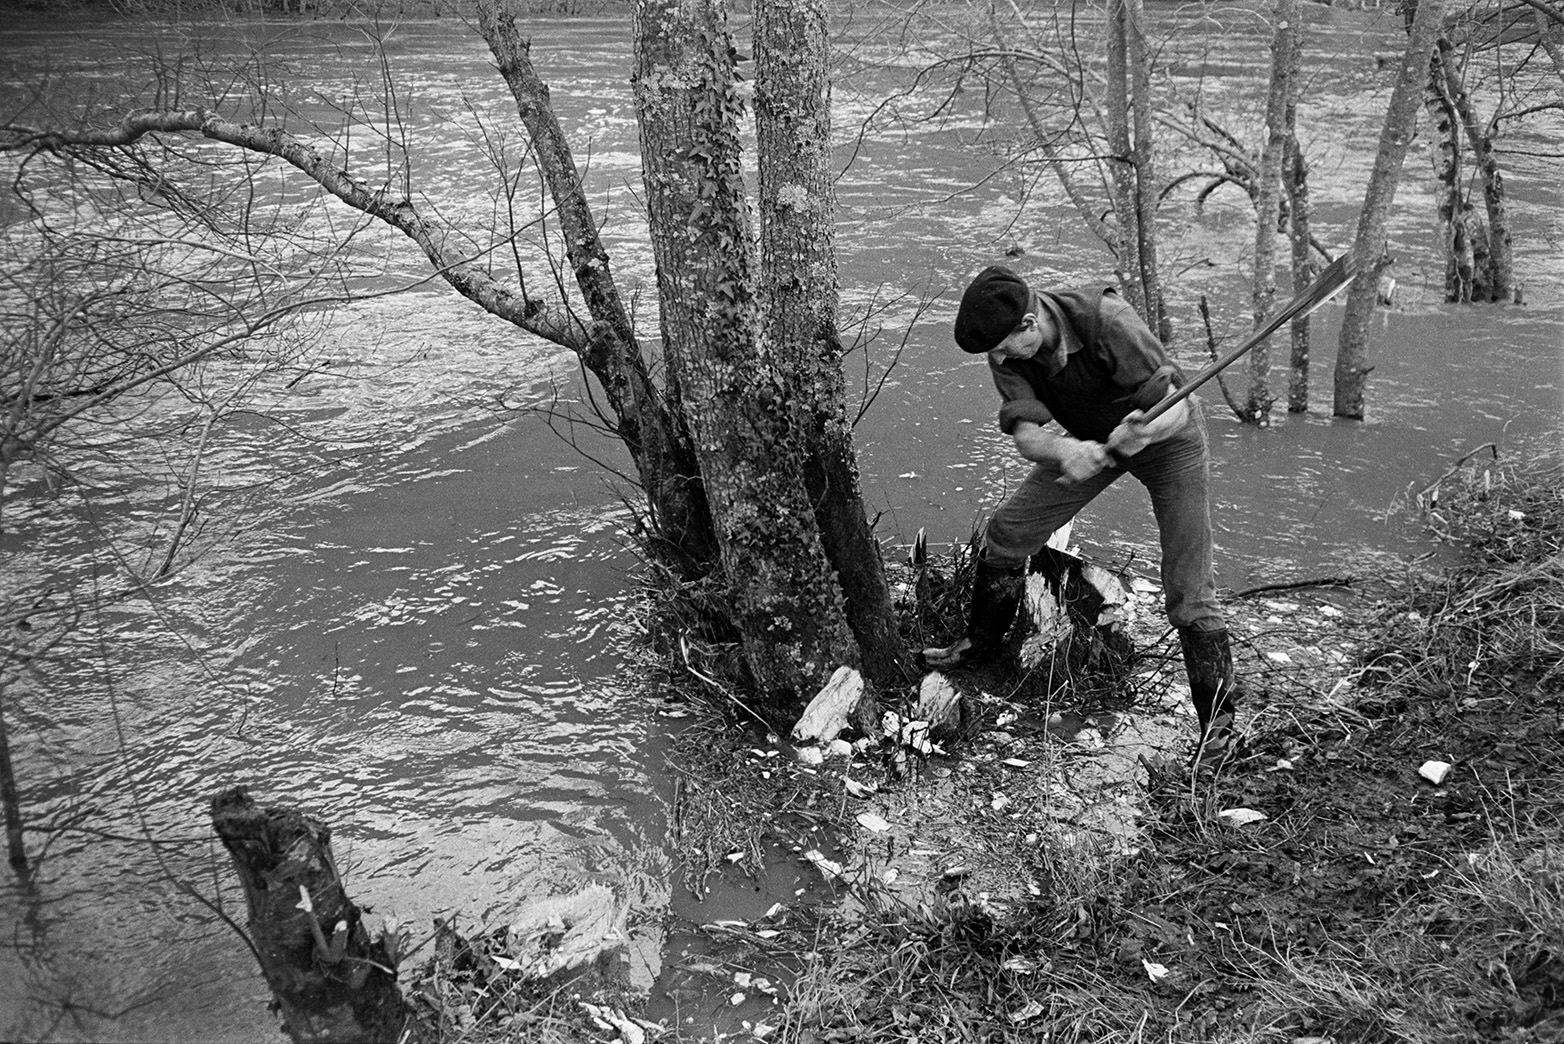 Ivor Bourne chopping down trees, with an axe, on the banks of the flooded River Torridge at Mill Road Farm, Beaford. The farm was also known as Jeffrys.